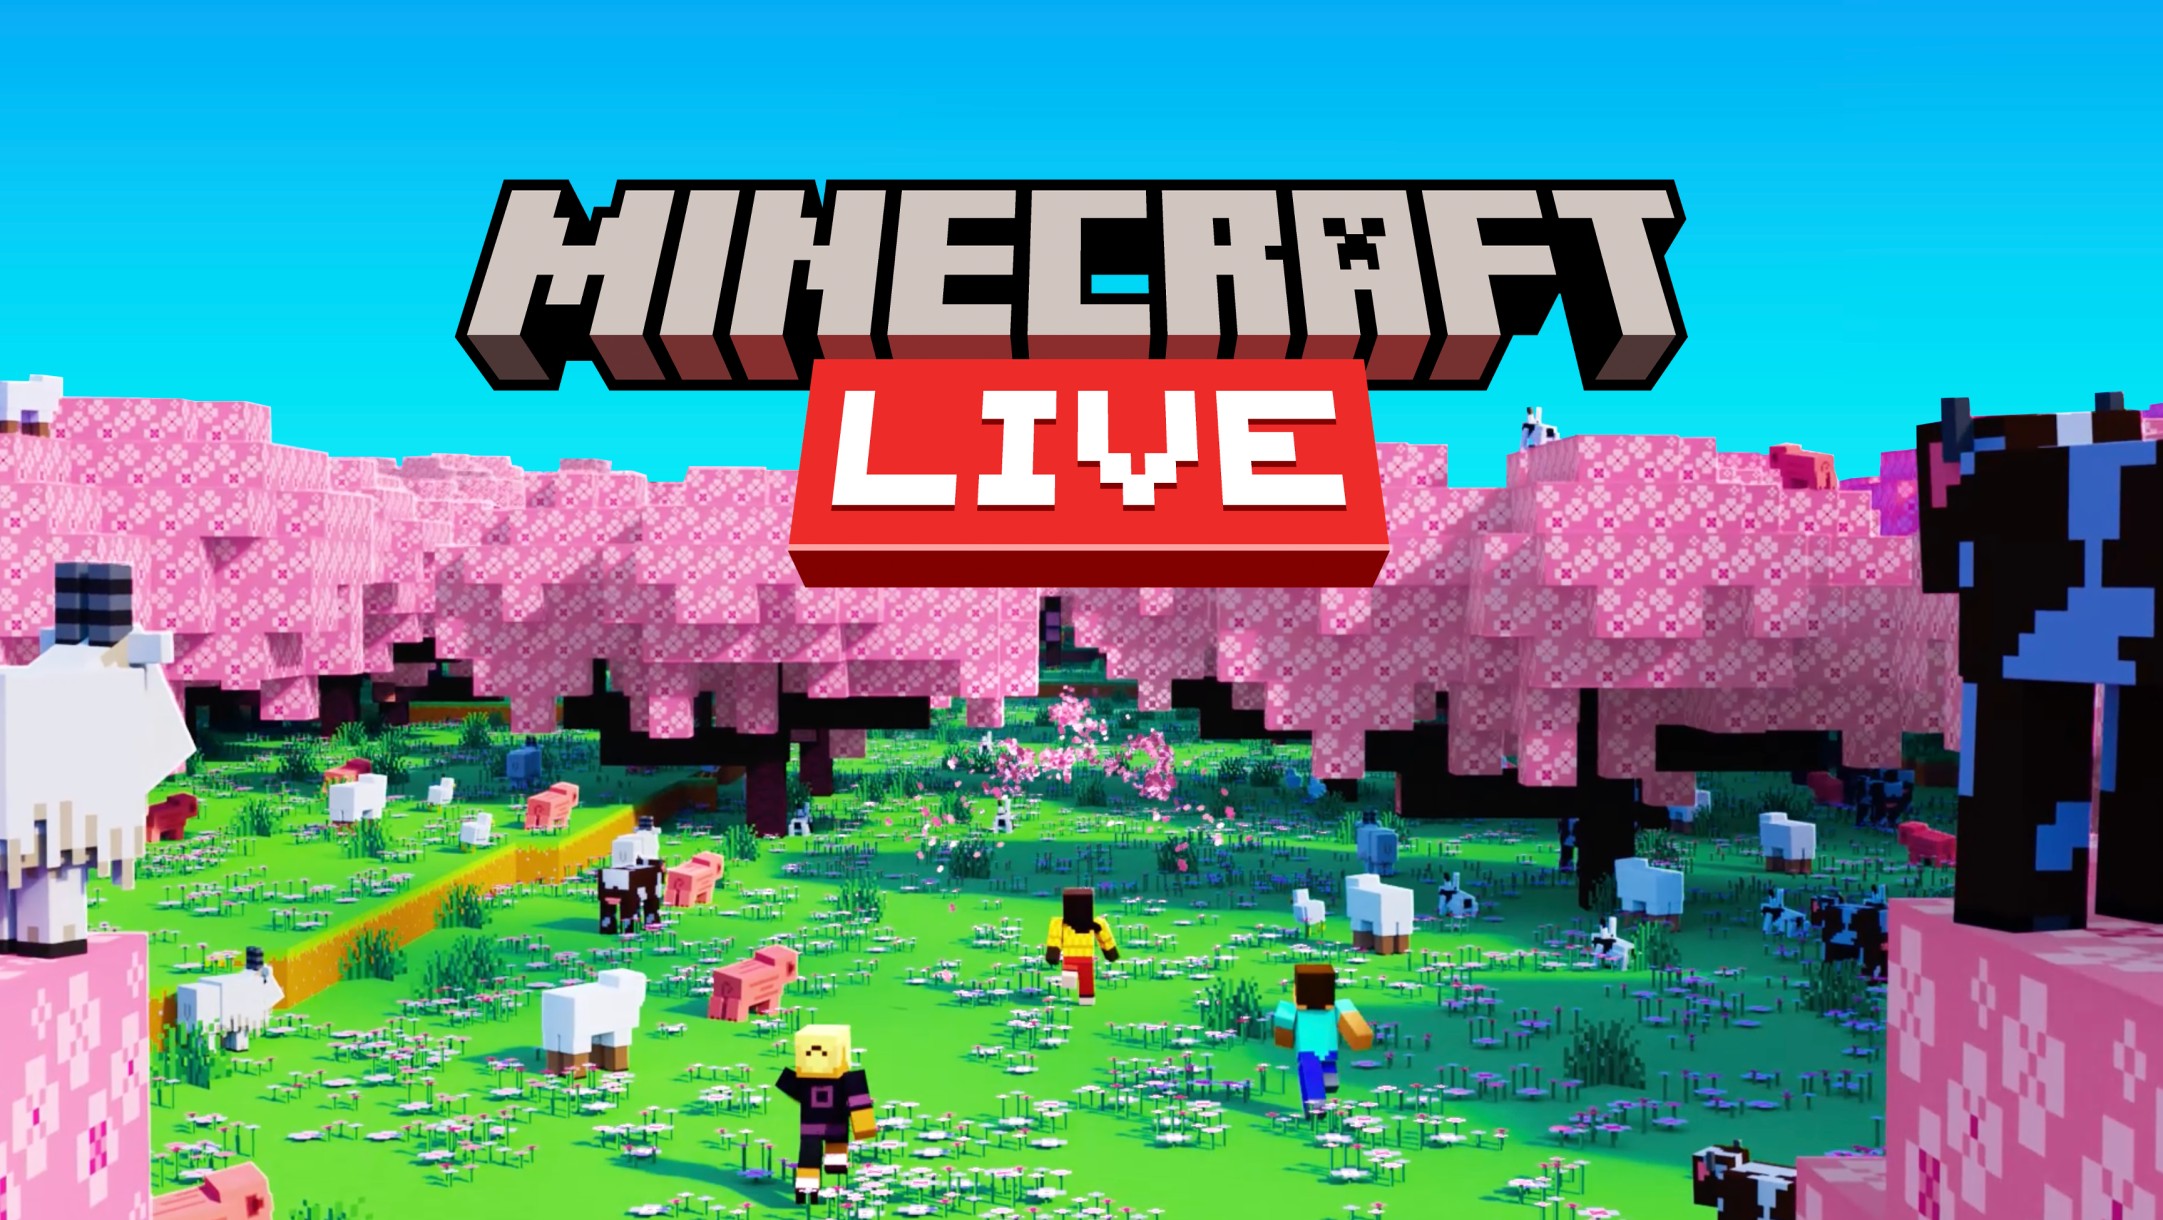 Minecraft Live 2023 is official — and we're getting another mob